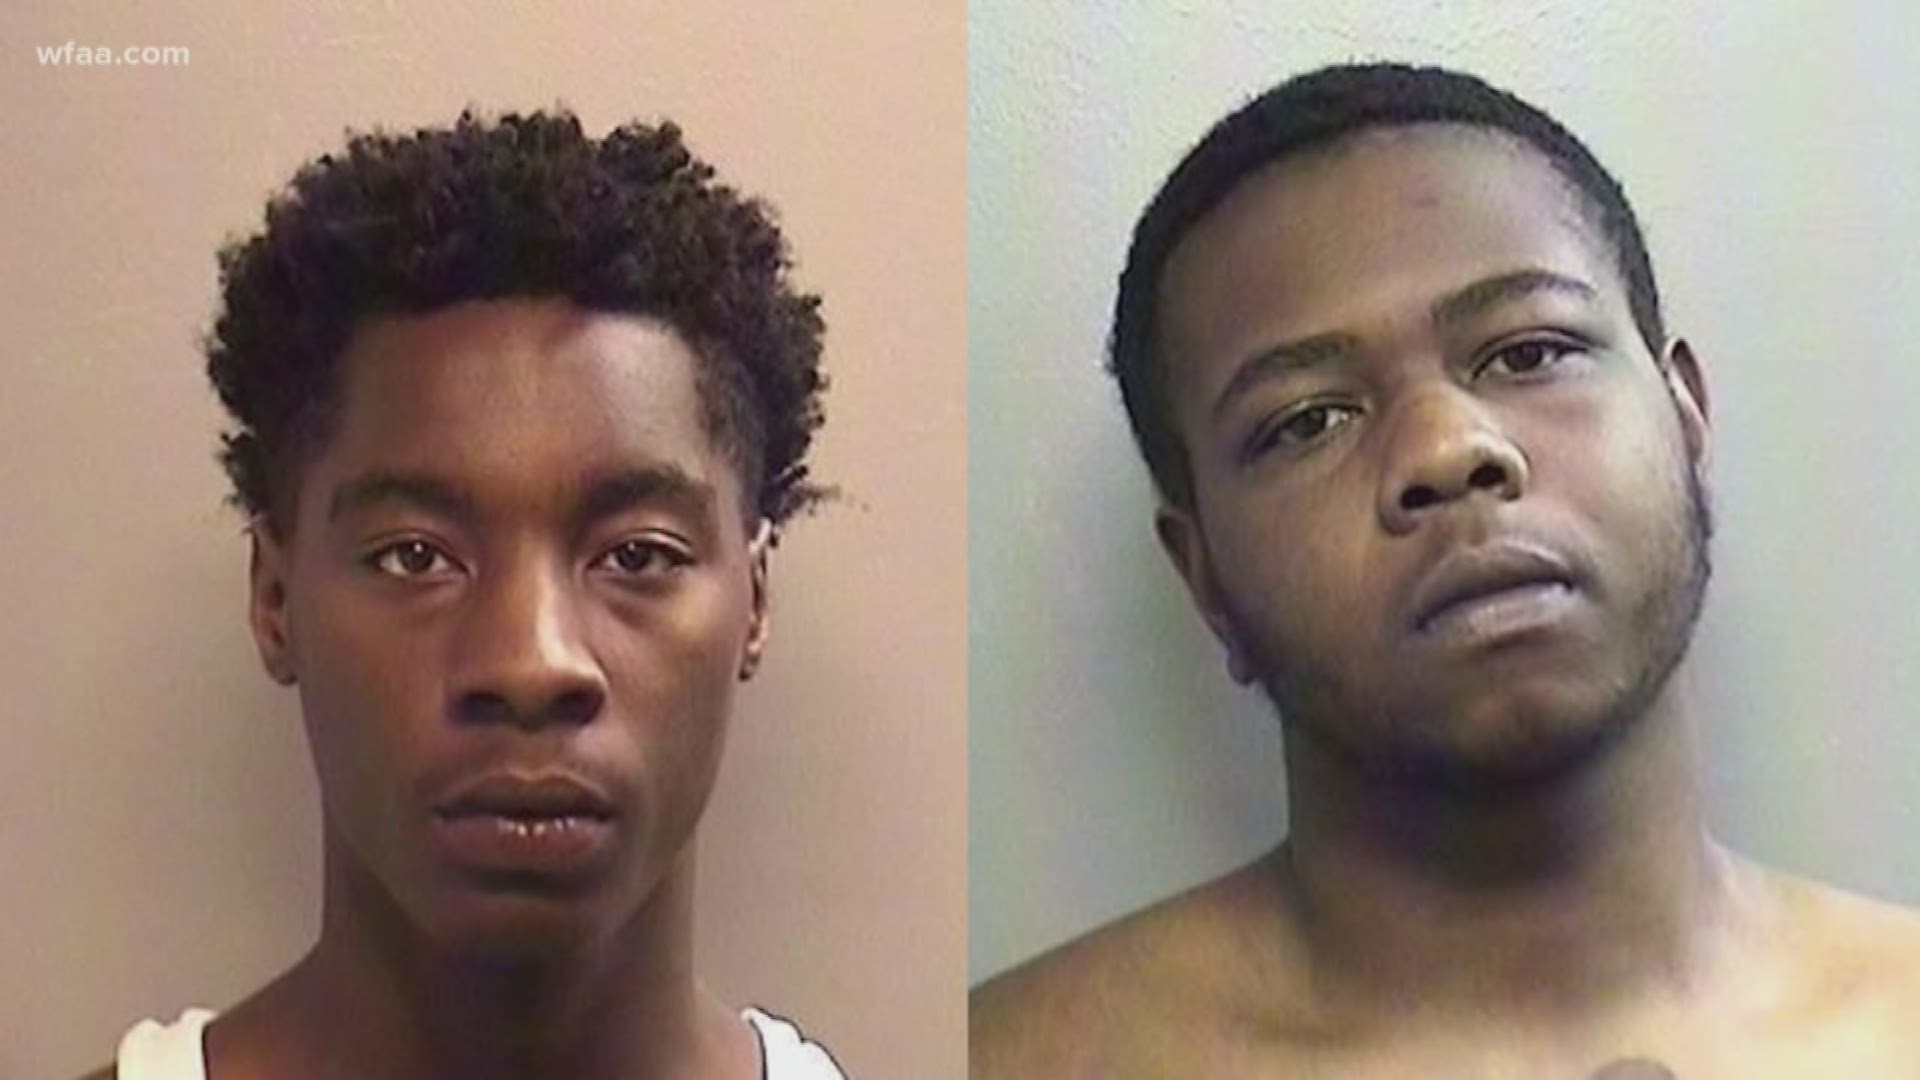 Keyon Flynn and Alexander Onyeador each face a murder charge in connection with Anthony Strather's death, according to arrest warrant affidavits.